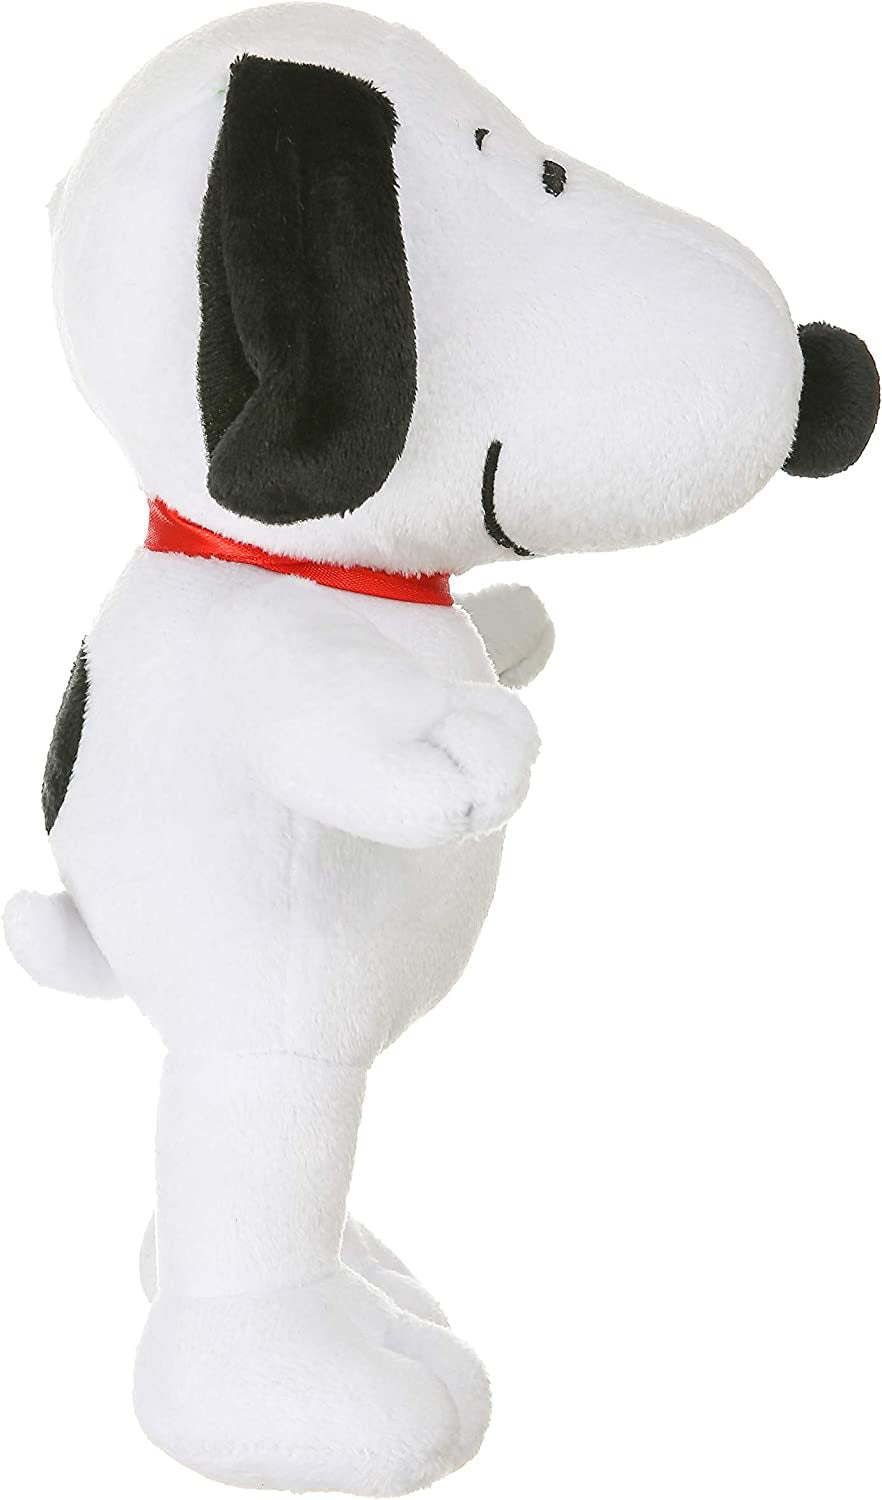 Snoopy Plush Squeaker Dog Toy - Officially Licensed Peanuts Product